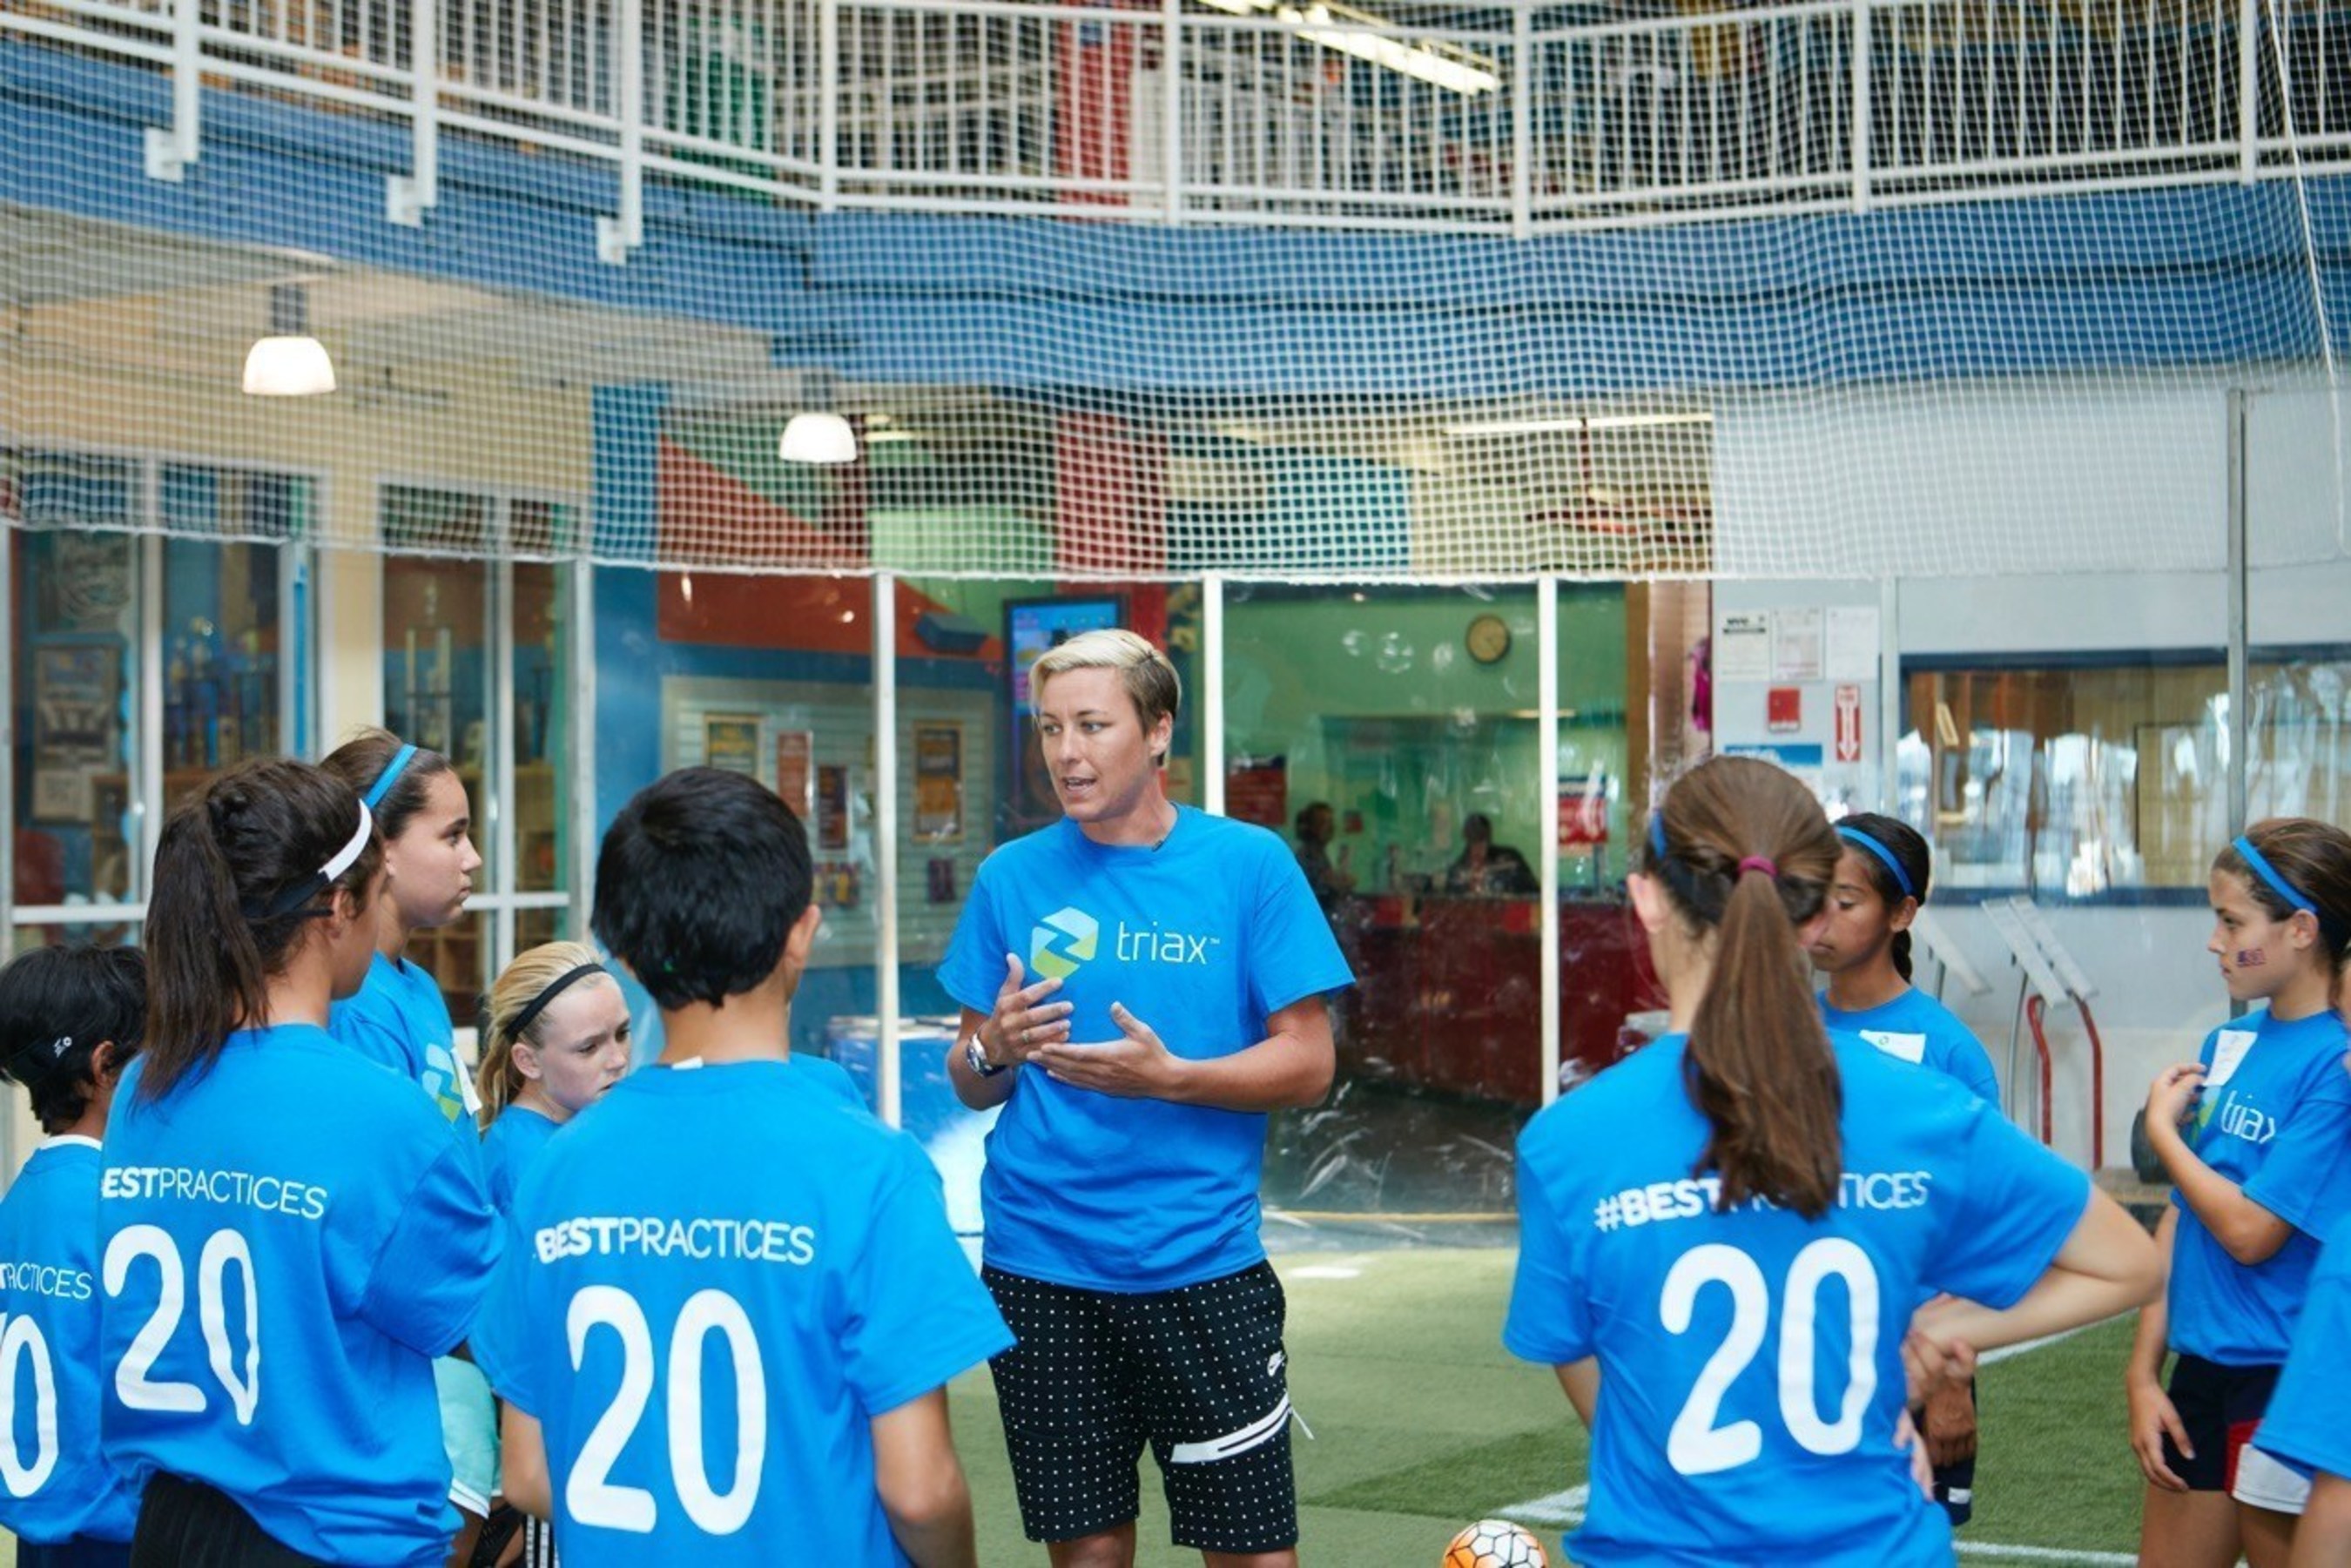 Abby Wambach discussing safety technique during Triax Tec #BestPractices training session.  Triax today announced partnership with IBM Watson Ecosystem as part of concussion research and safety for players.